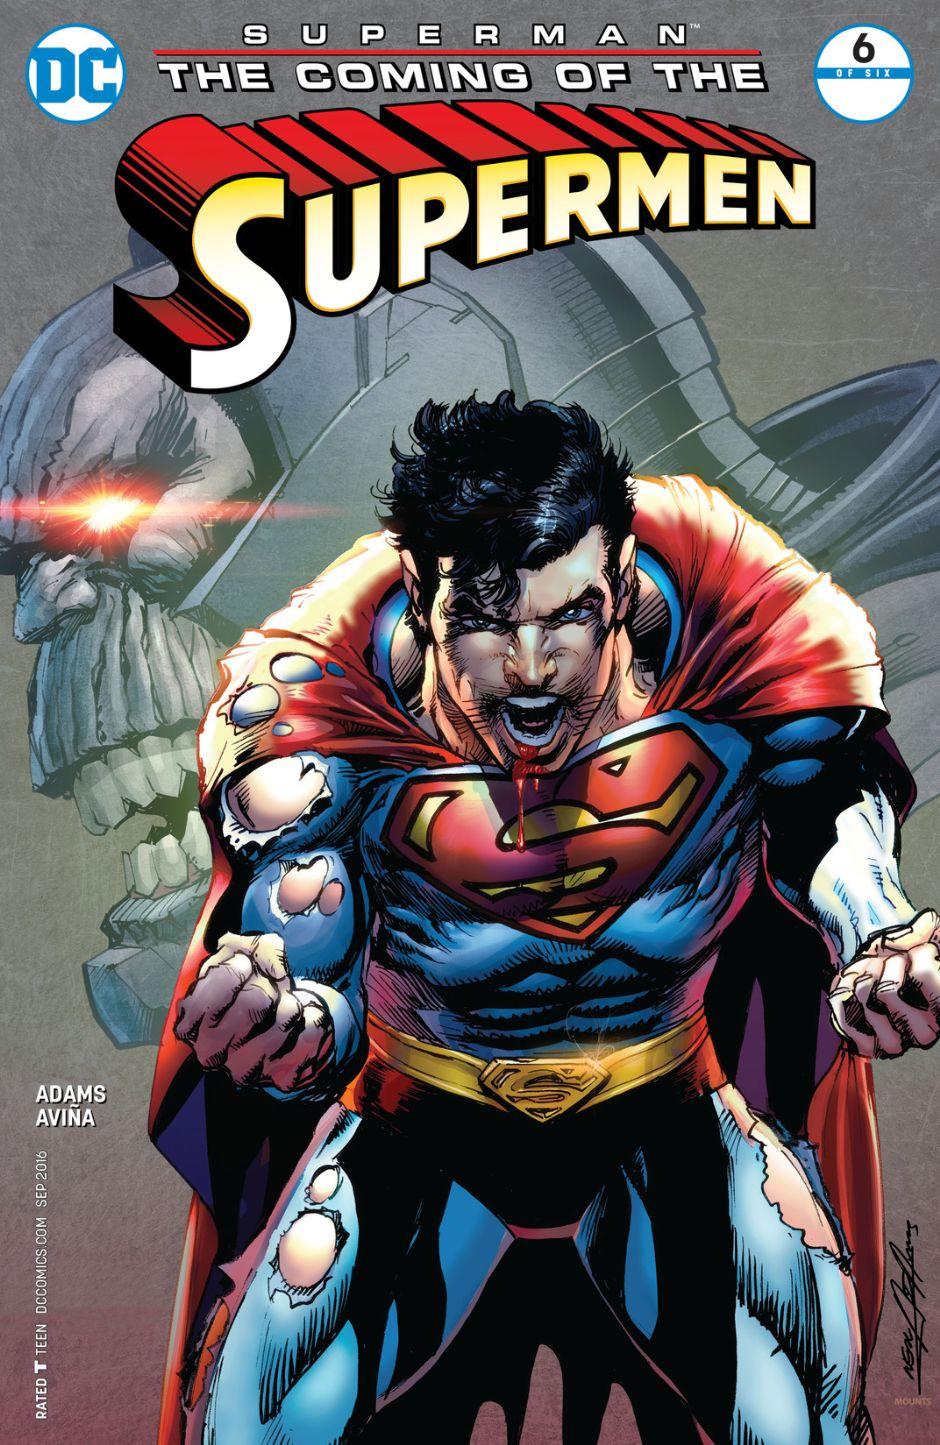 Superman: The Coming of the Supermen Vol. 1 #6